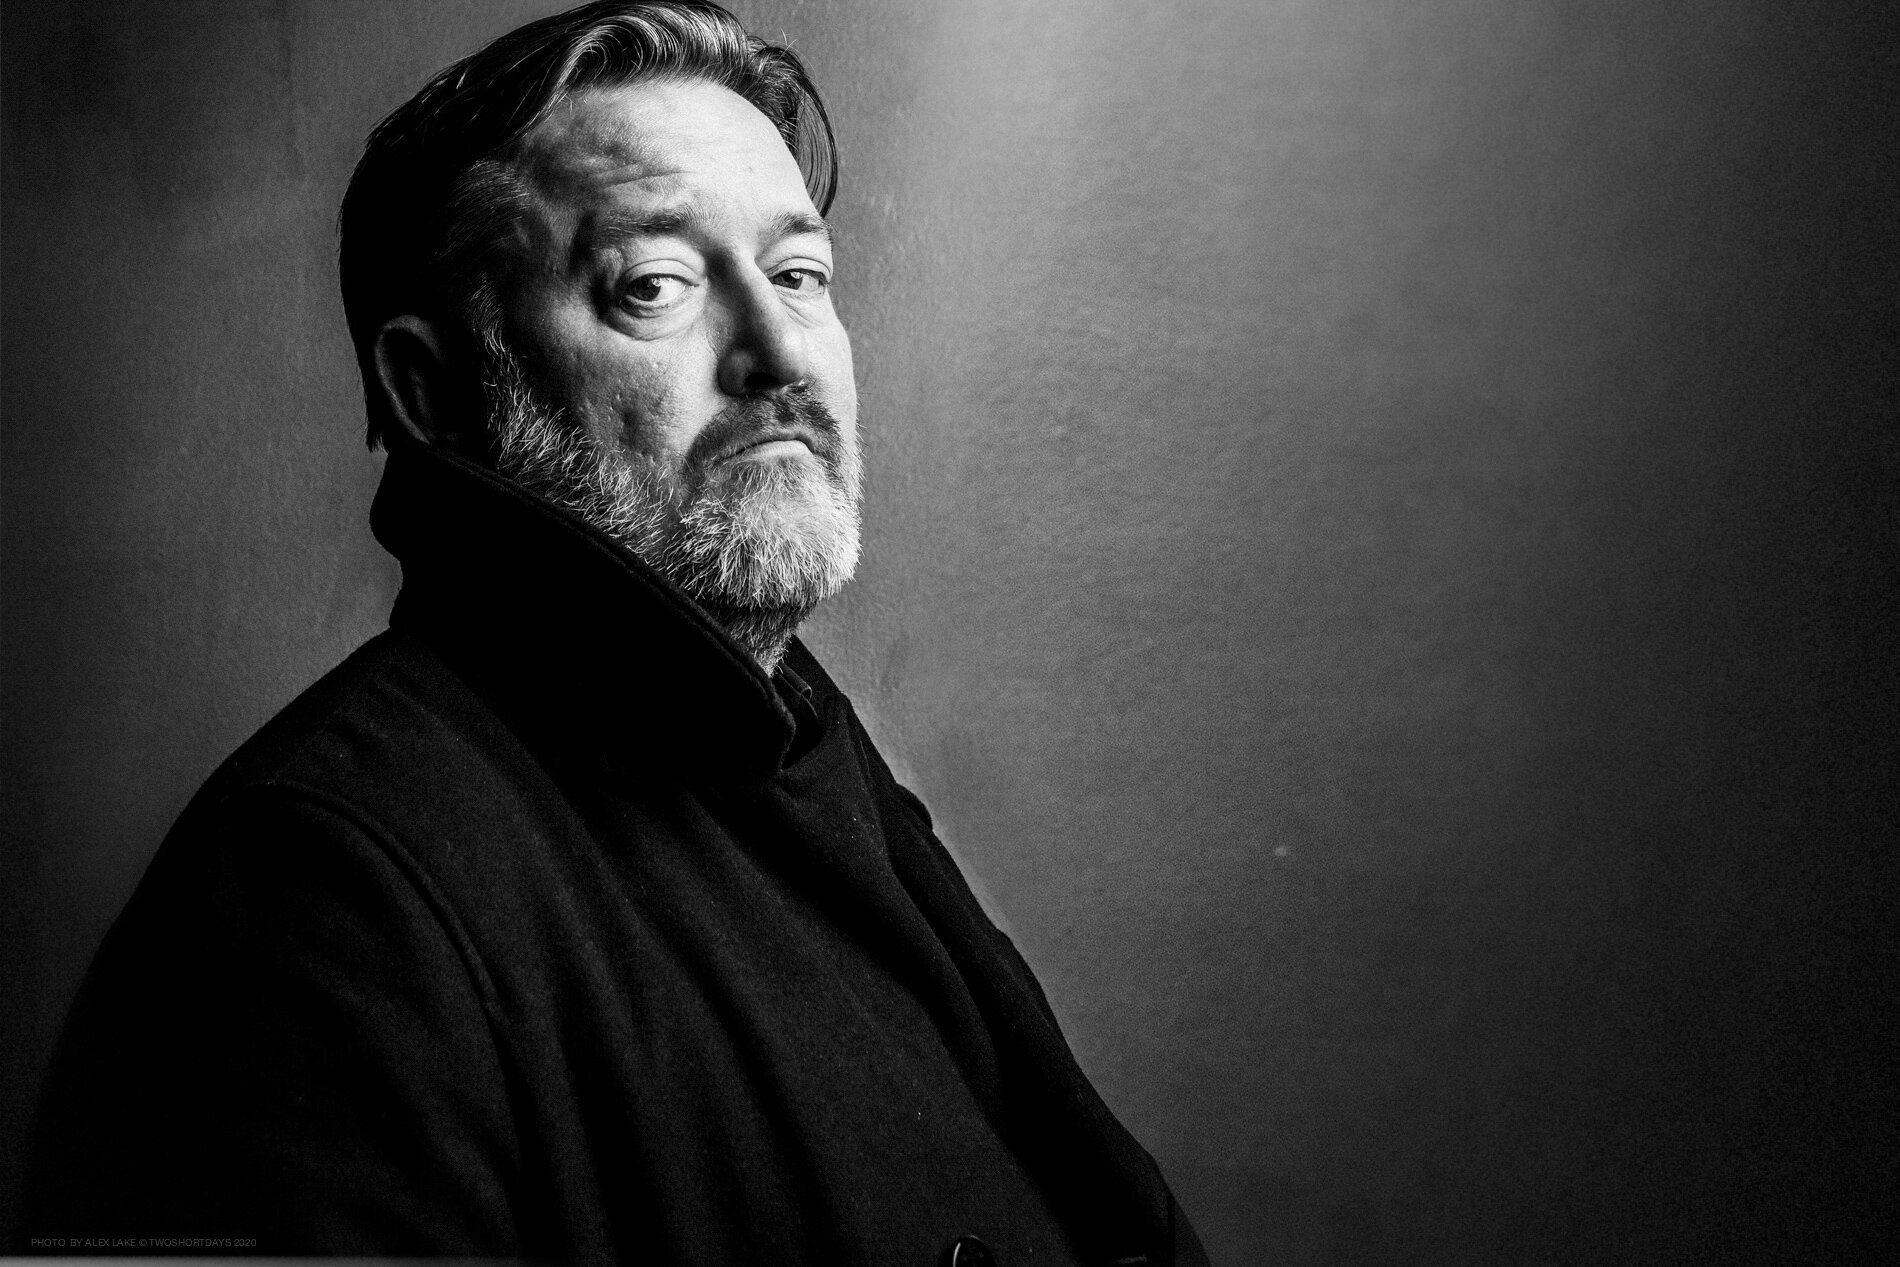 guy_garvey_photography_copyright_ALEX_LAKE_do_not_reproduce_without_permission_TWOSHORTDAYS.jpg